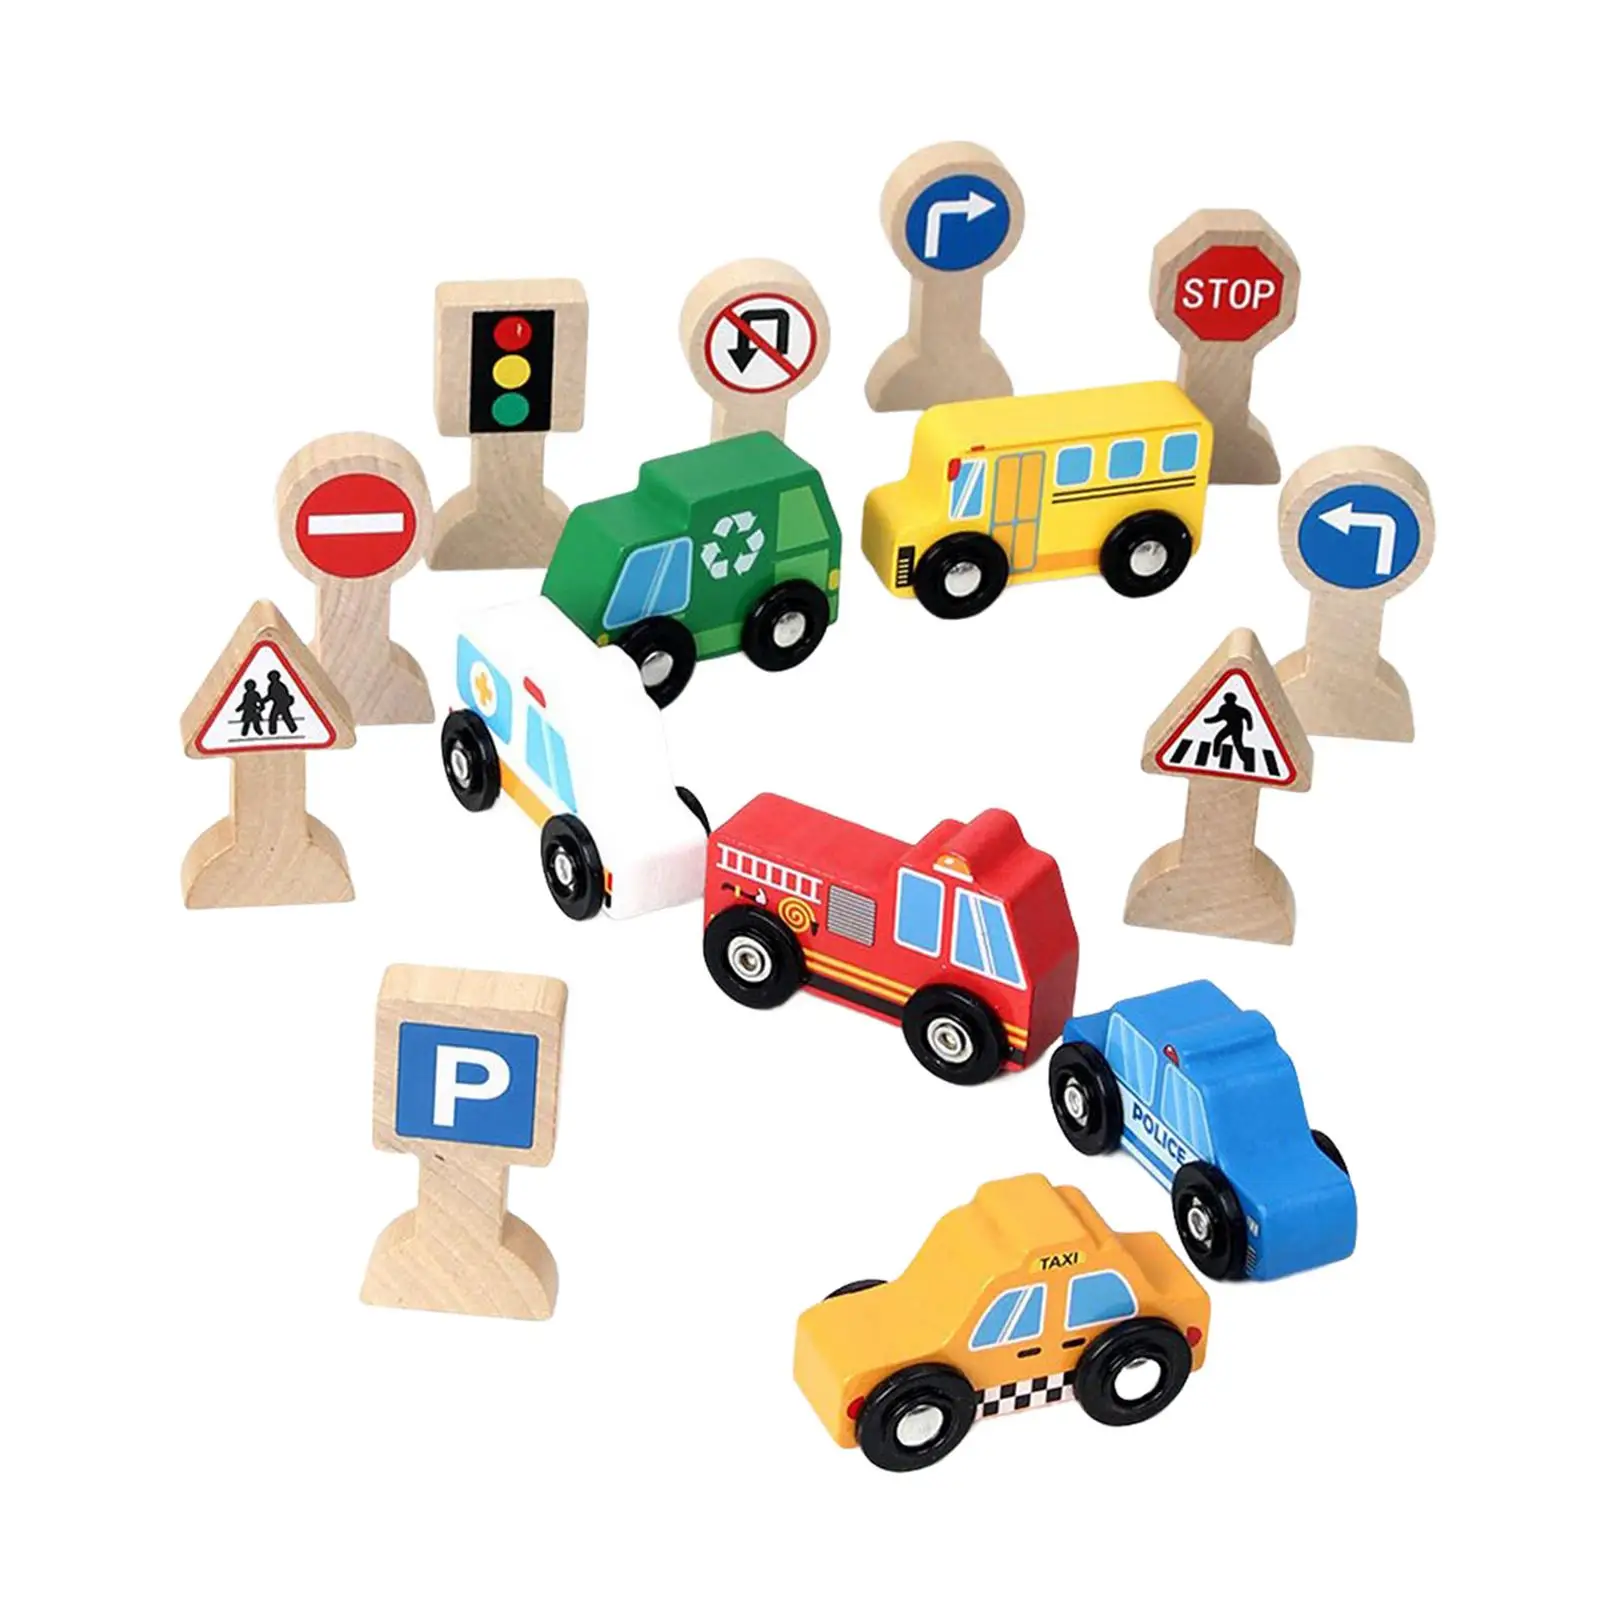 Wooden Cars Toys Wooden Street Signs Playset Educational Toy Mini Toy Vehicles for Boys Children Toddlers Kids Holiday Gifts